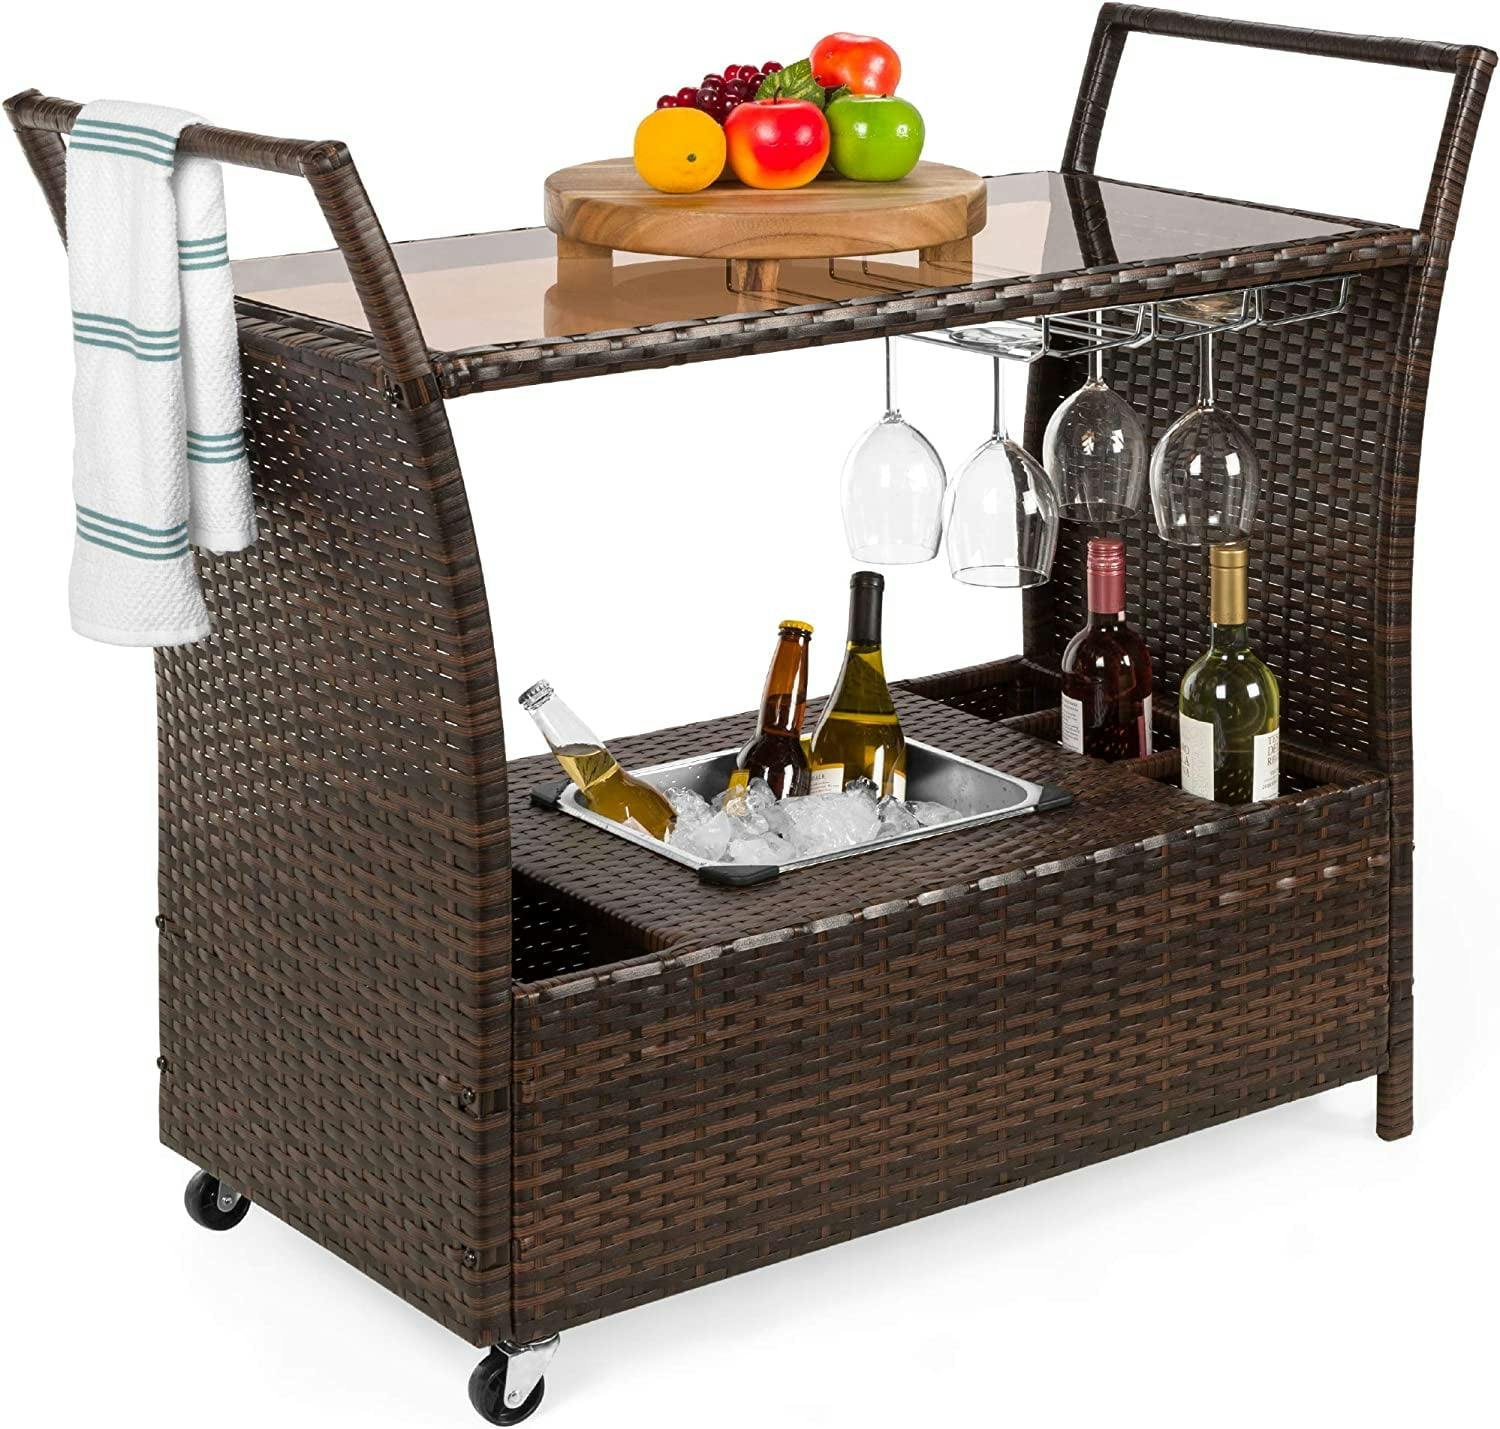 Elegant Outdoor Wicker Bar Cart with Tempered Glass Top and Ice Bucket - Brown